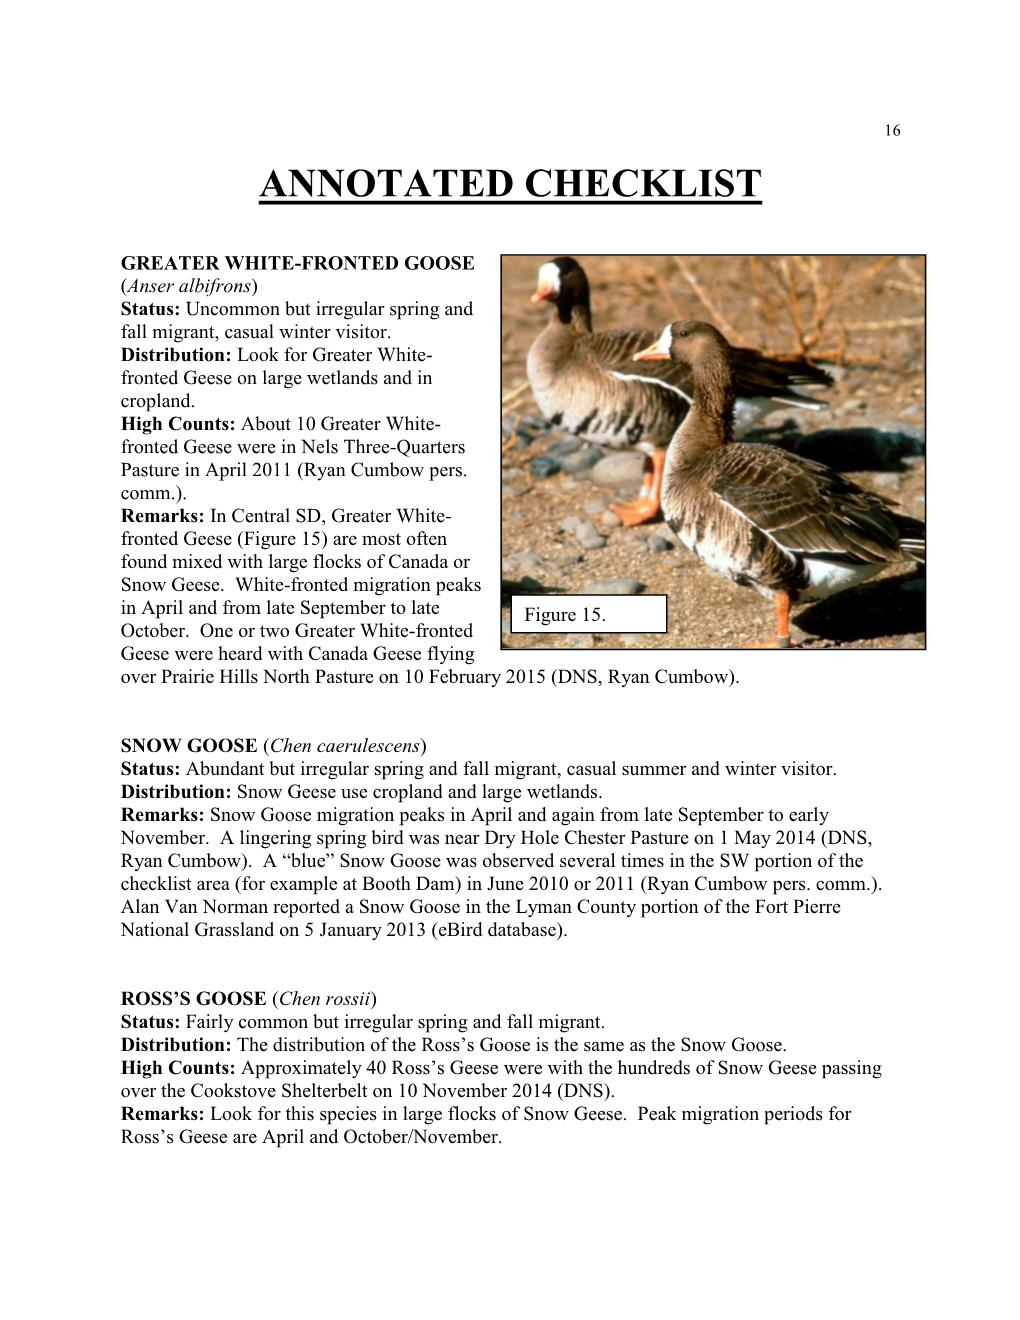 2016 Annotated Checklist of Birds on the Fort